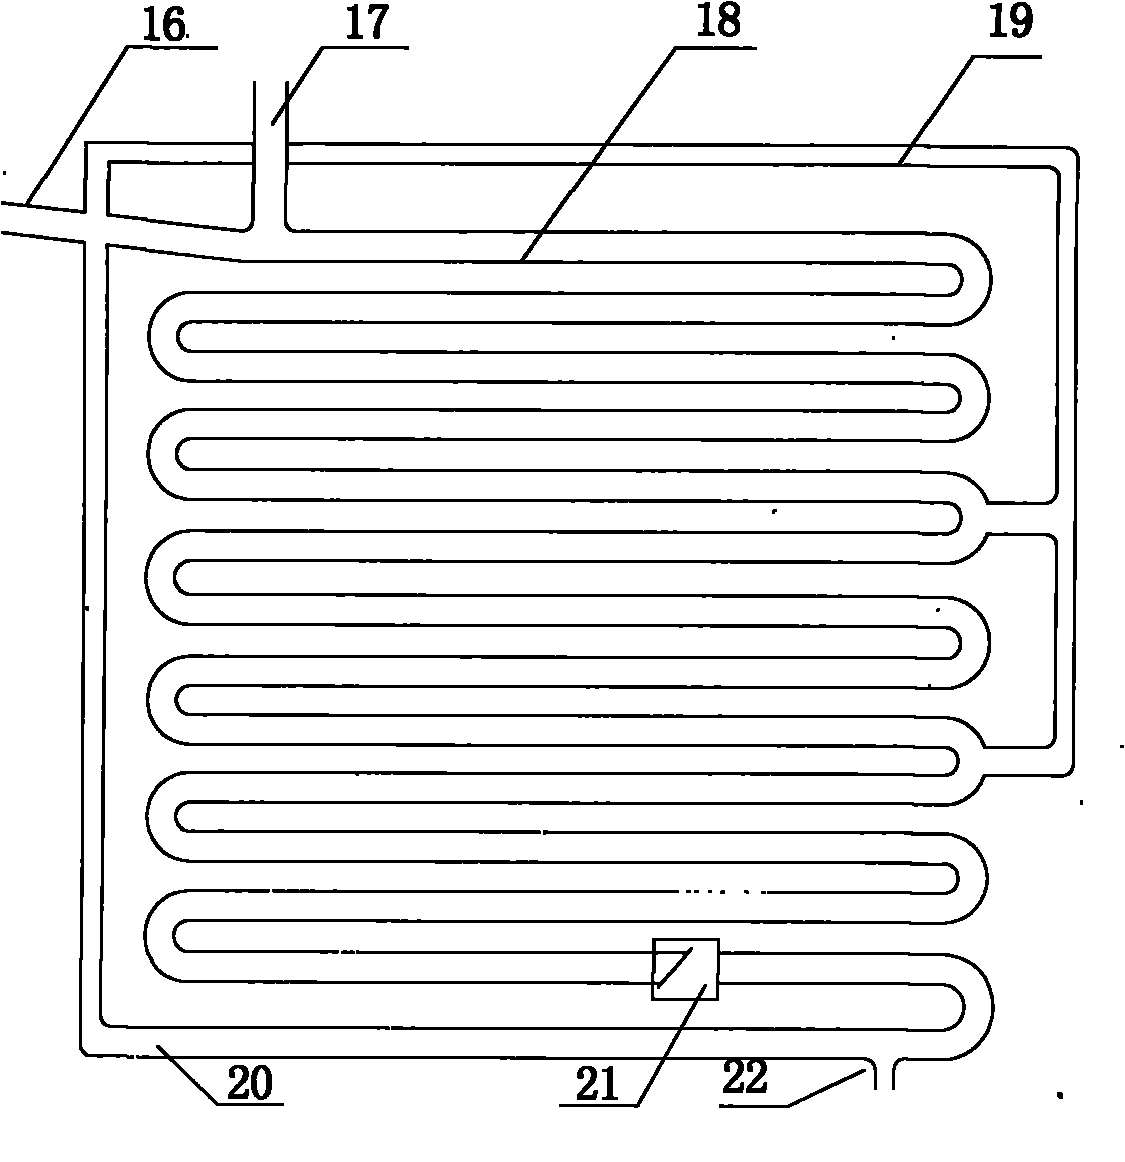 Direct-type solar air conditioning compound system